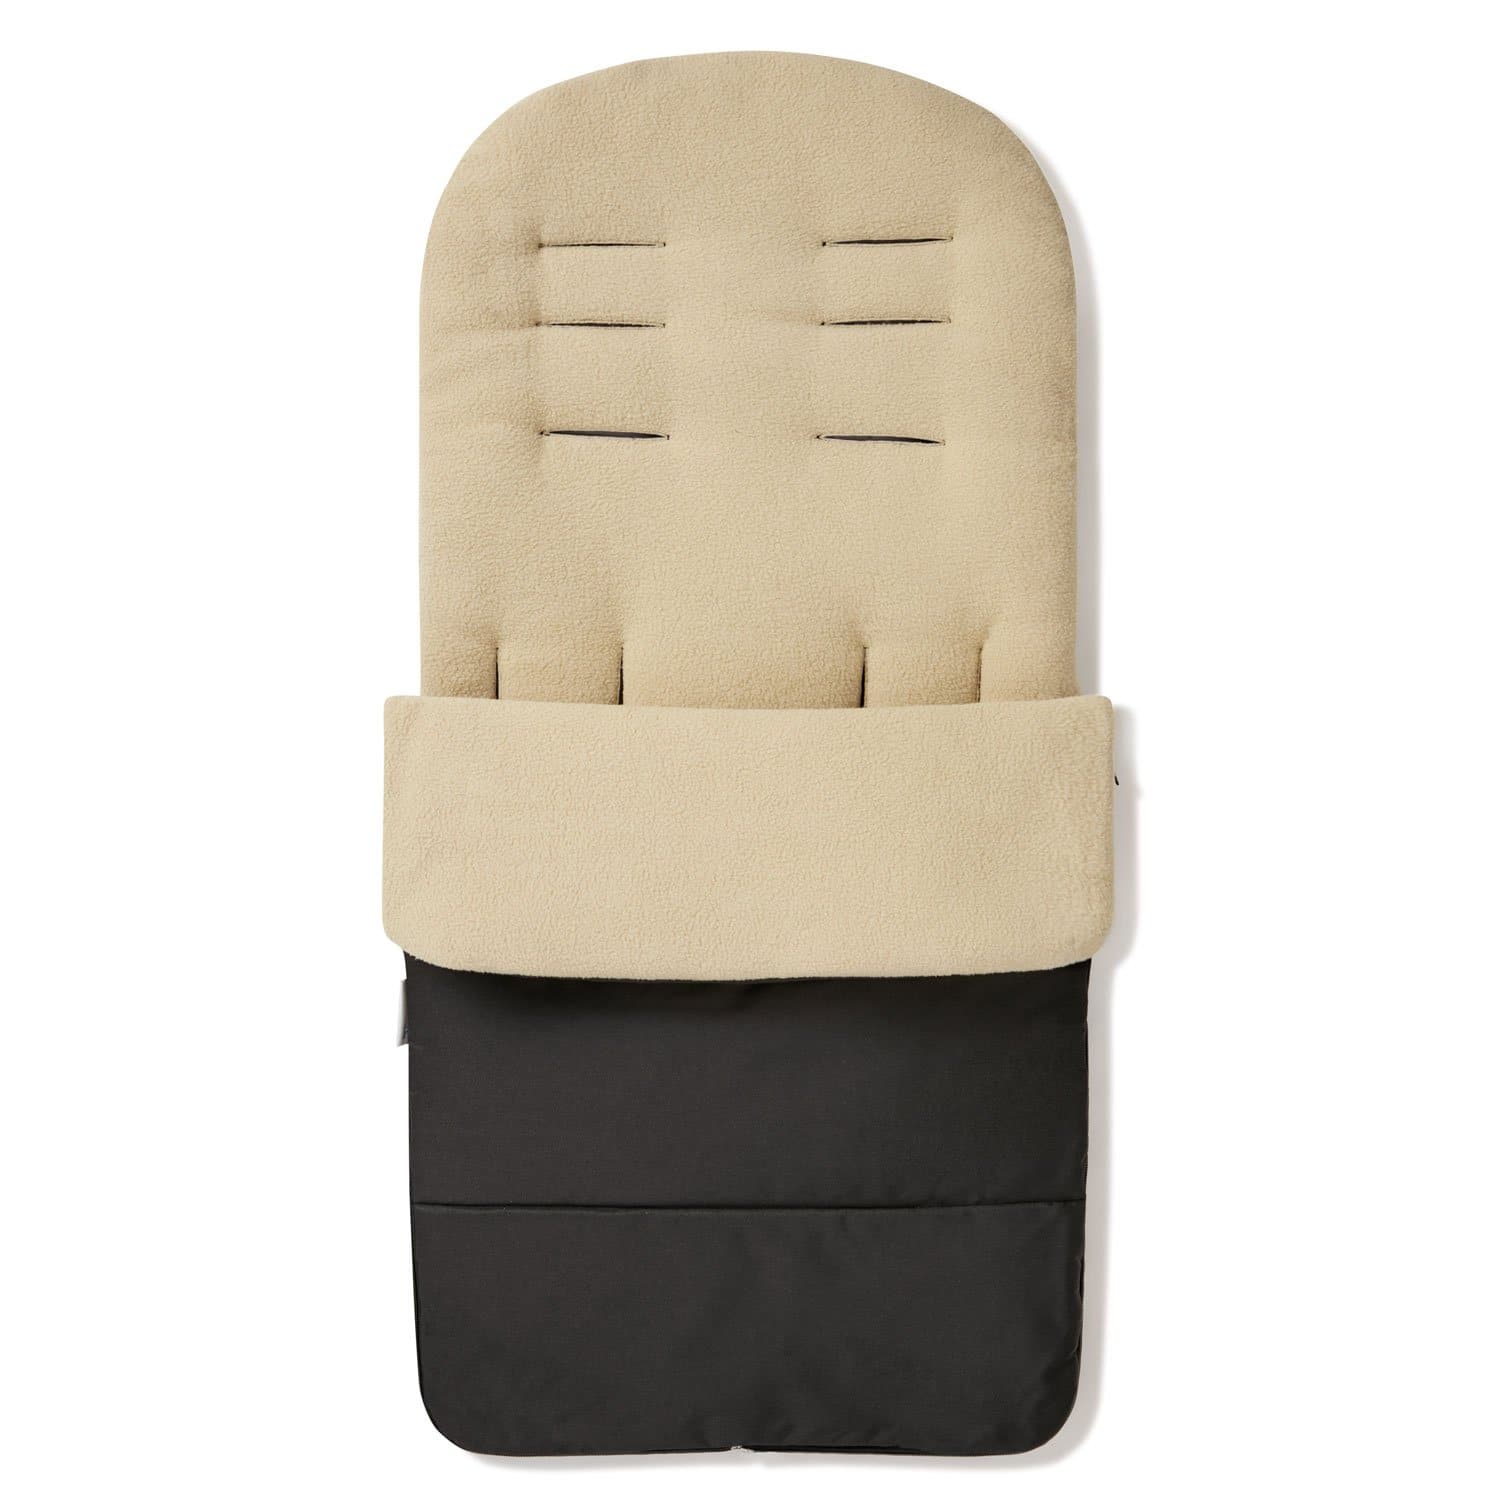 Premium Footmuff / Cosy Toes Compatible with Brevi - For Your Little One